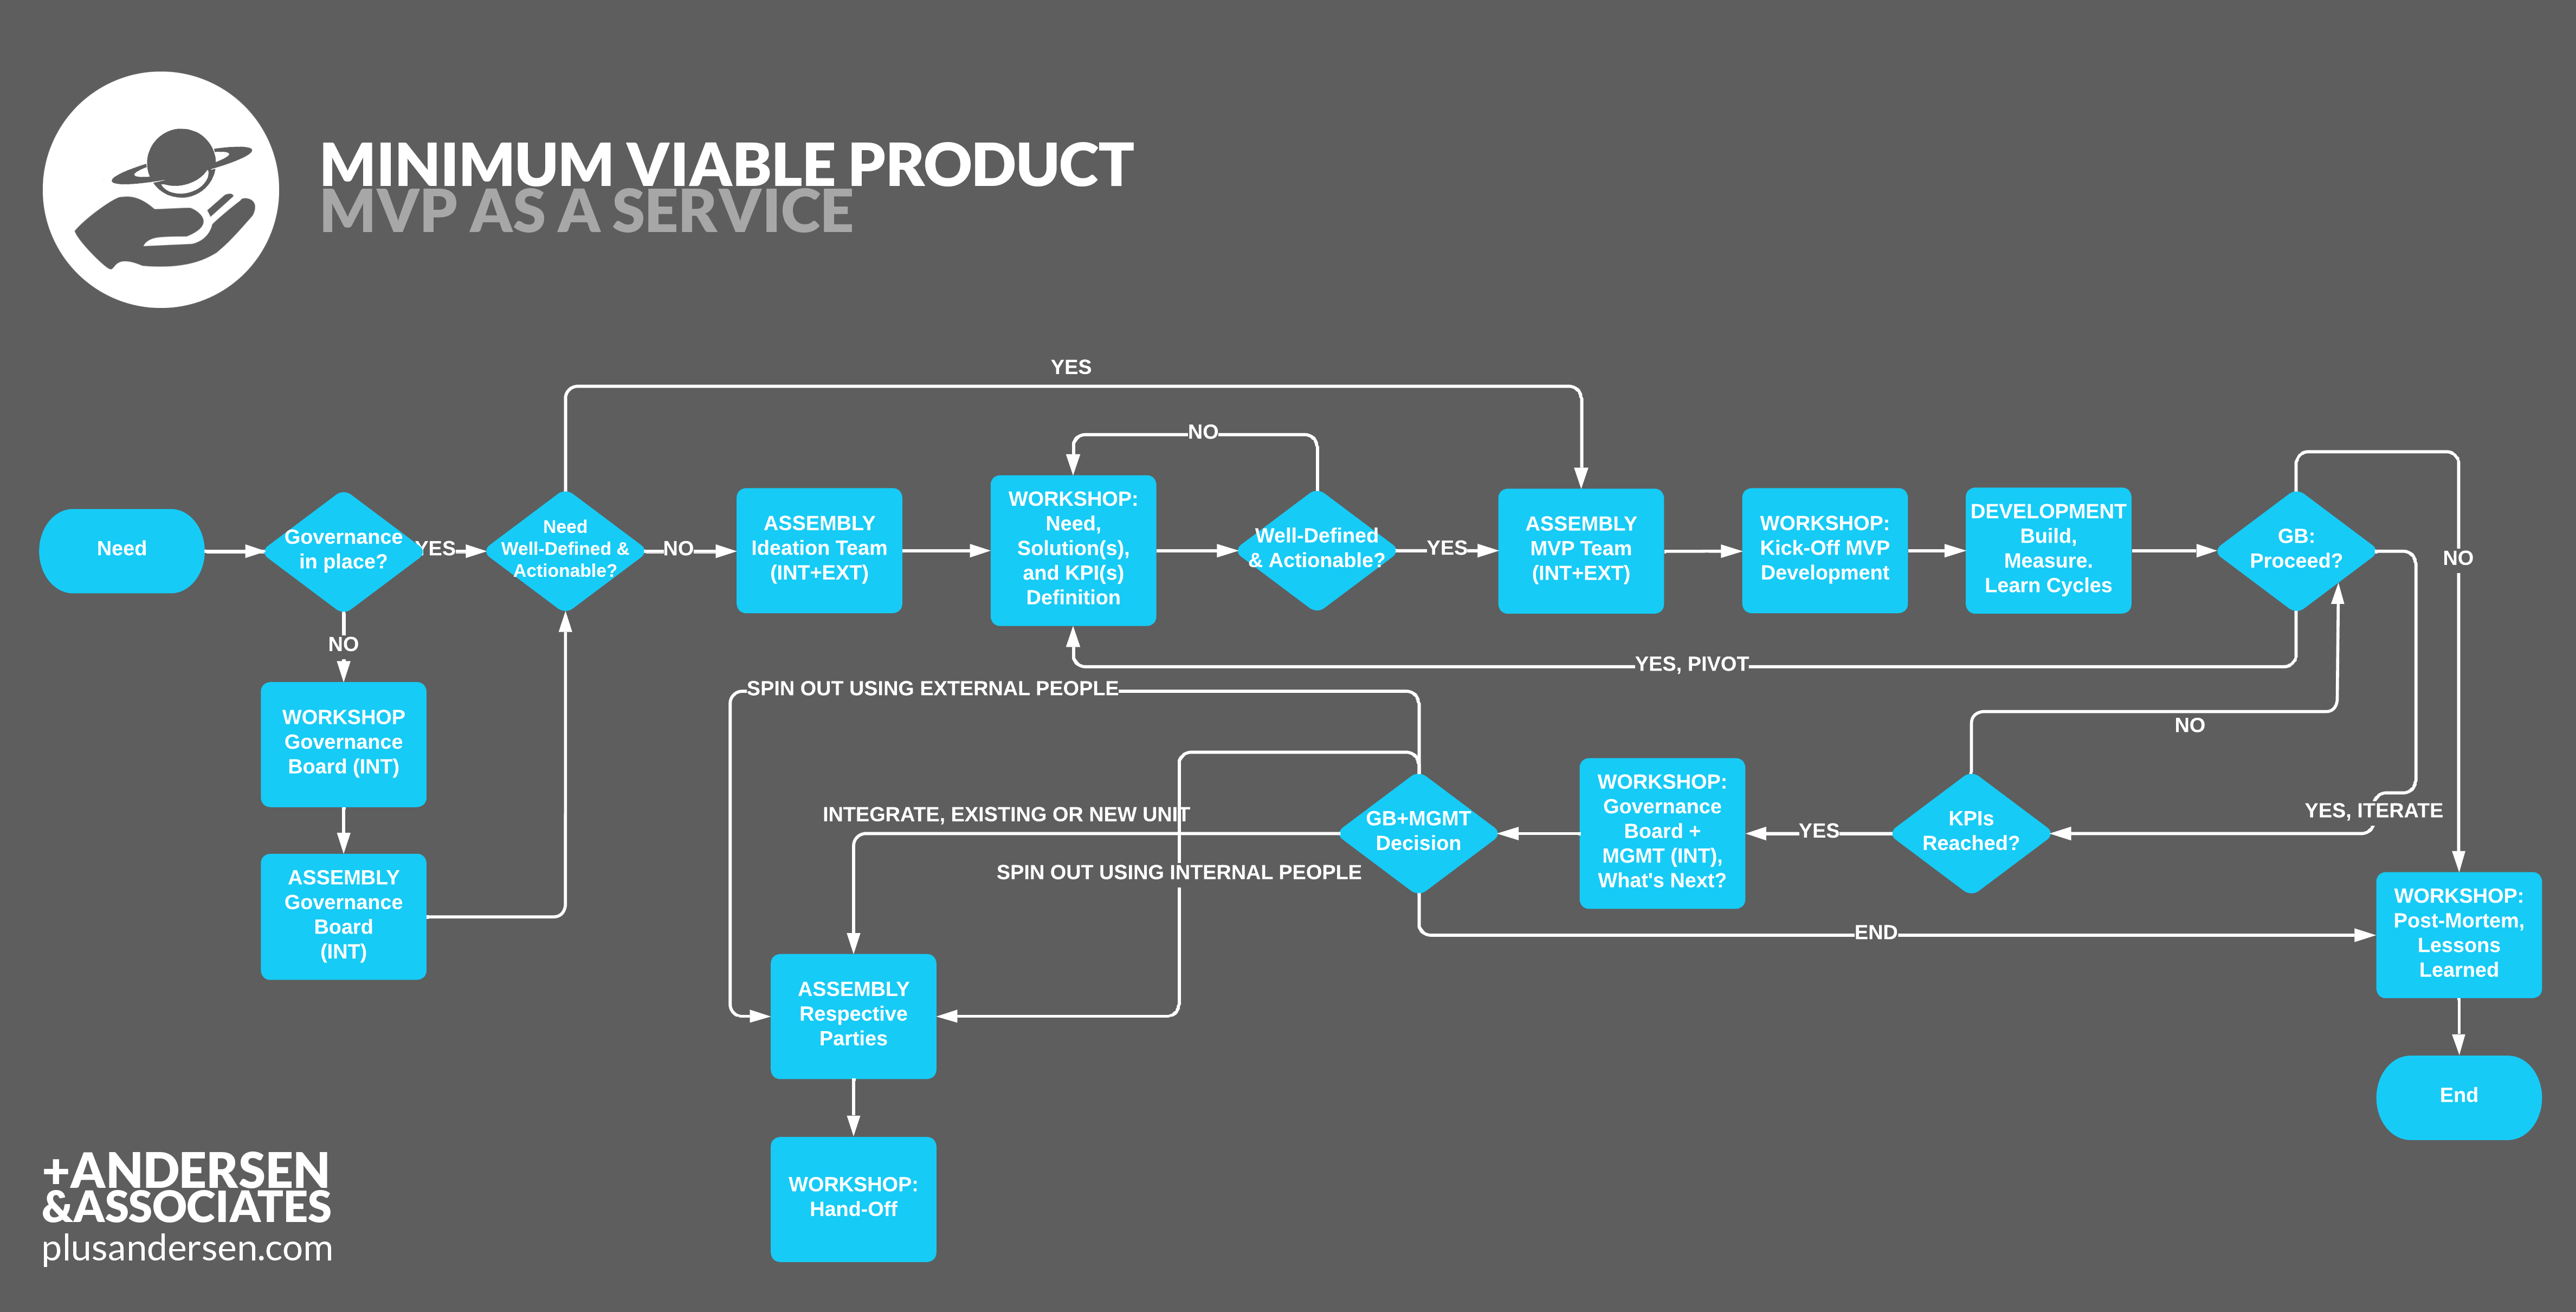 A flowchart of the MVP as a Service process